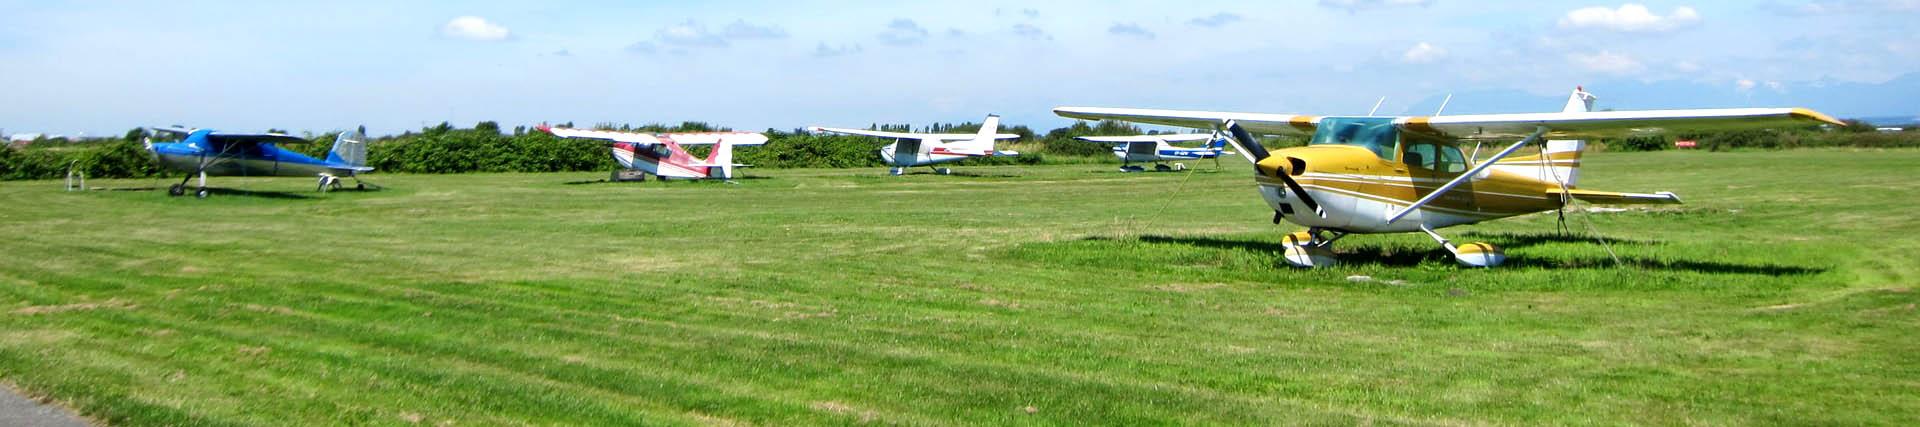 Five brightly coloured Cessna 152 aeroplanes parked on grass on a sunny day 